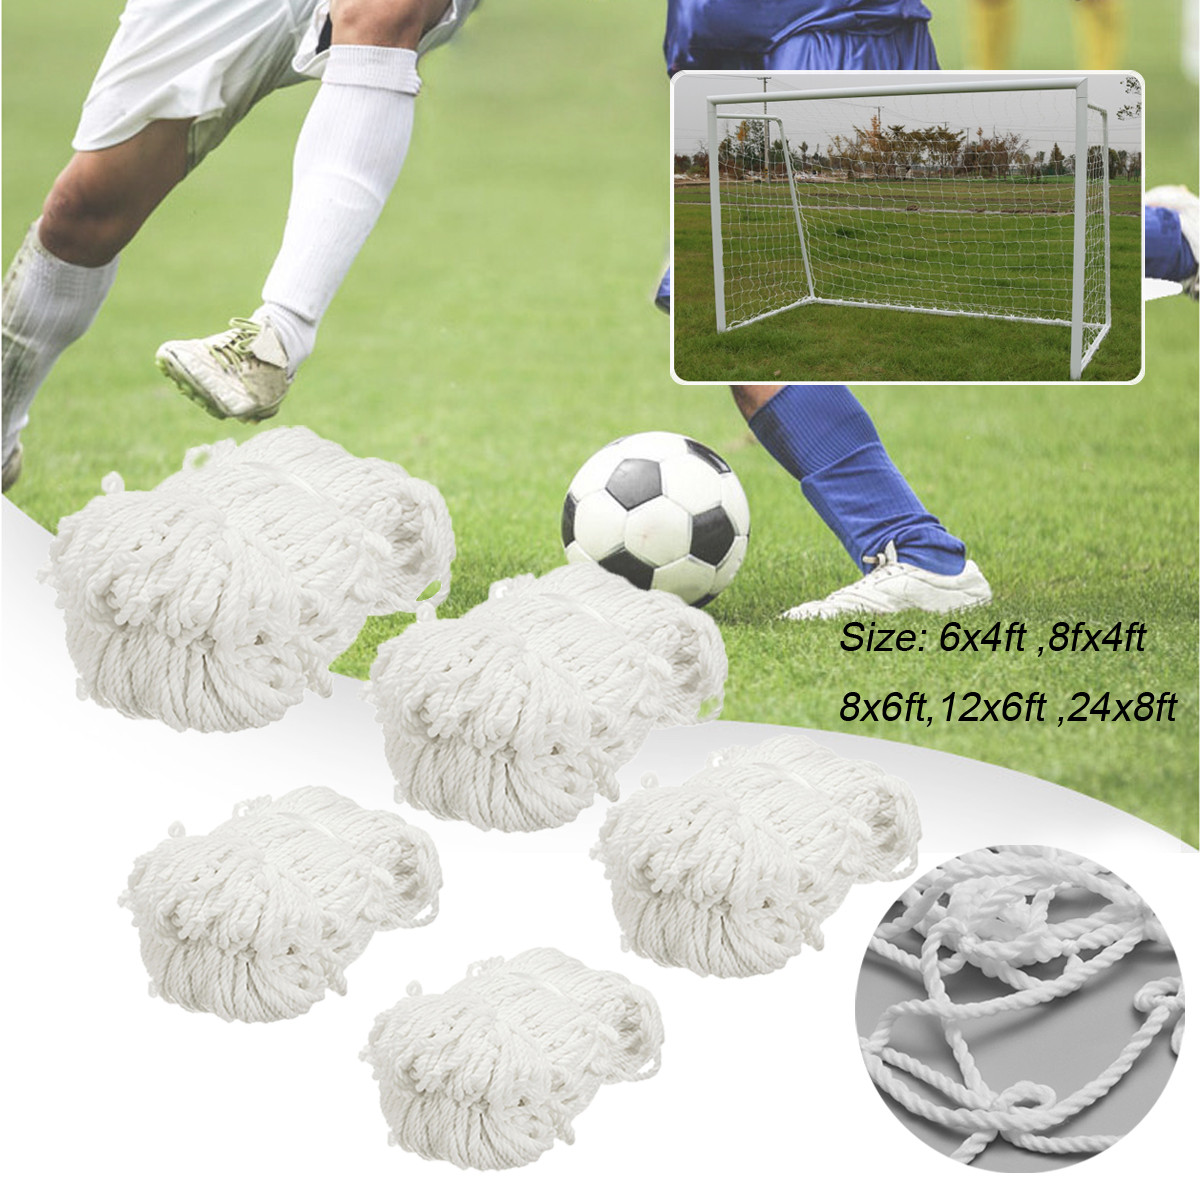 Football-Soccer-Goal-Post-Net-Training-Match-Replace-Outdoor-Full-Size-Adult-Kid-1249189-1